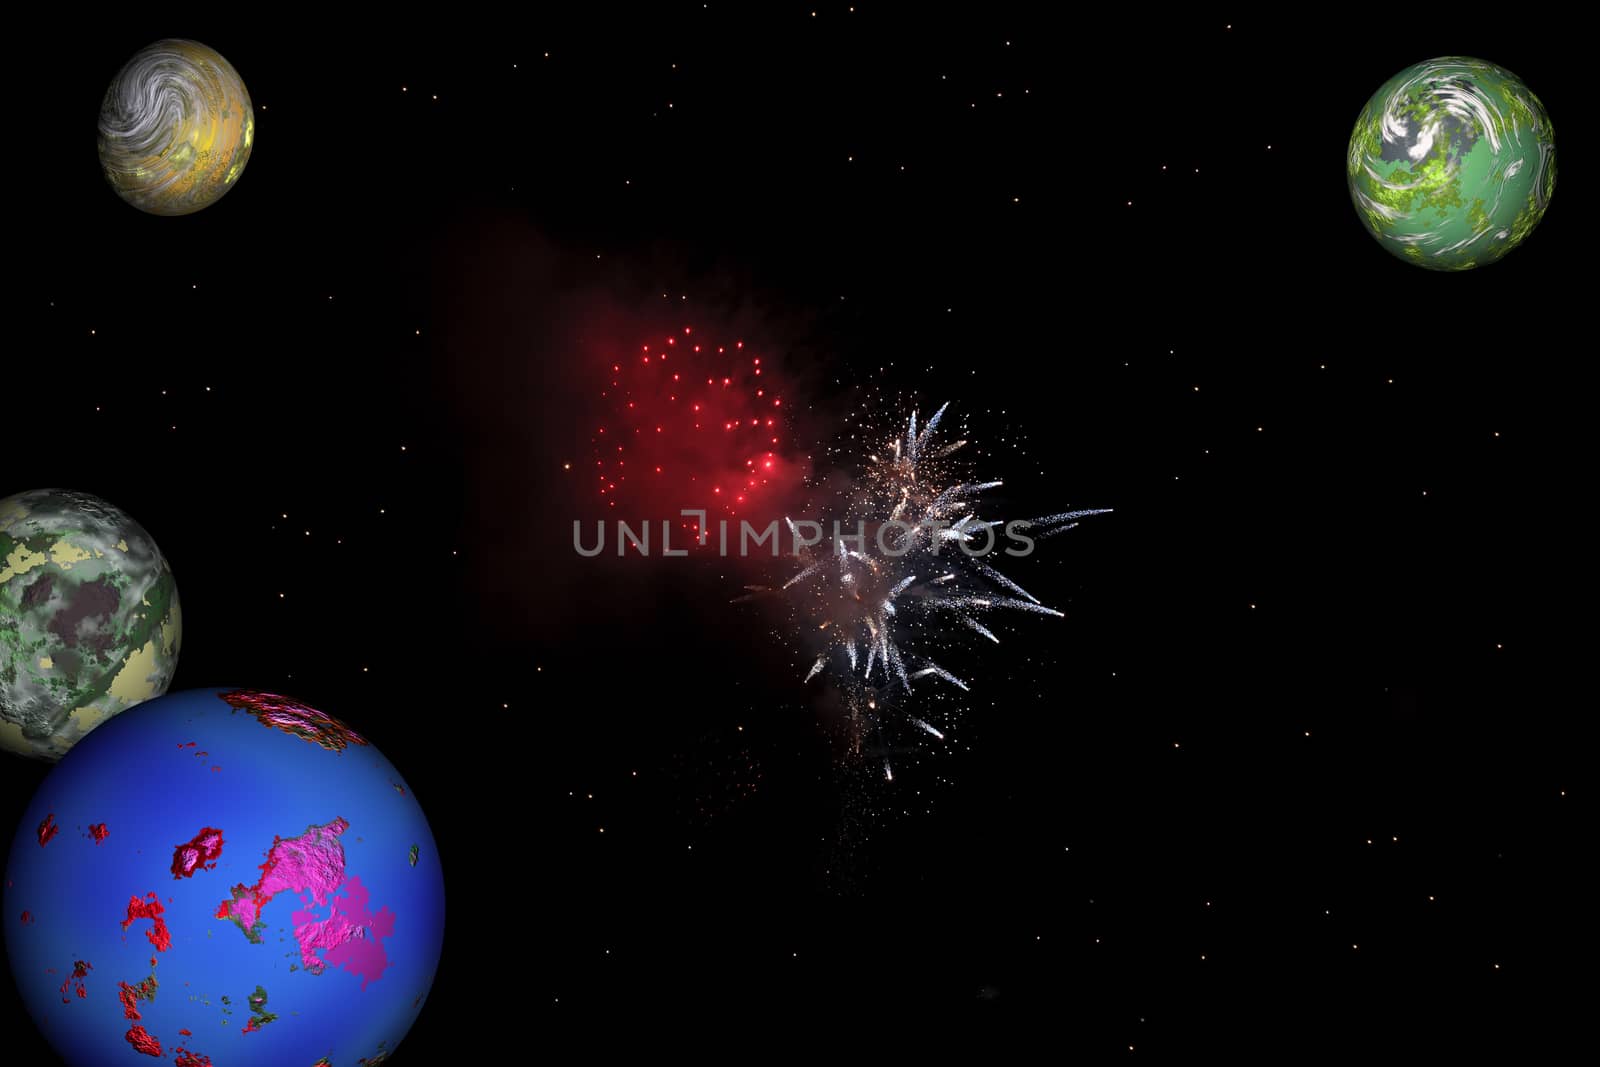 The planet and fireworks by Krakatuk